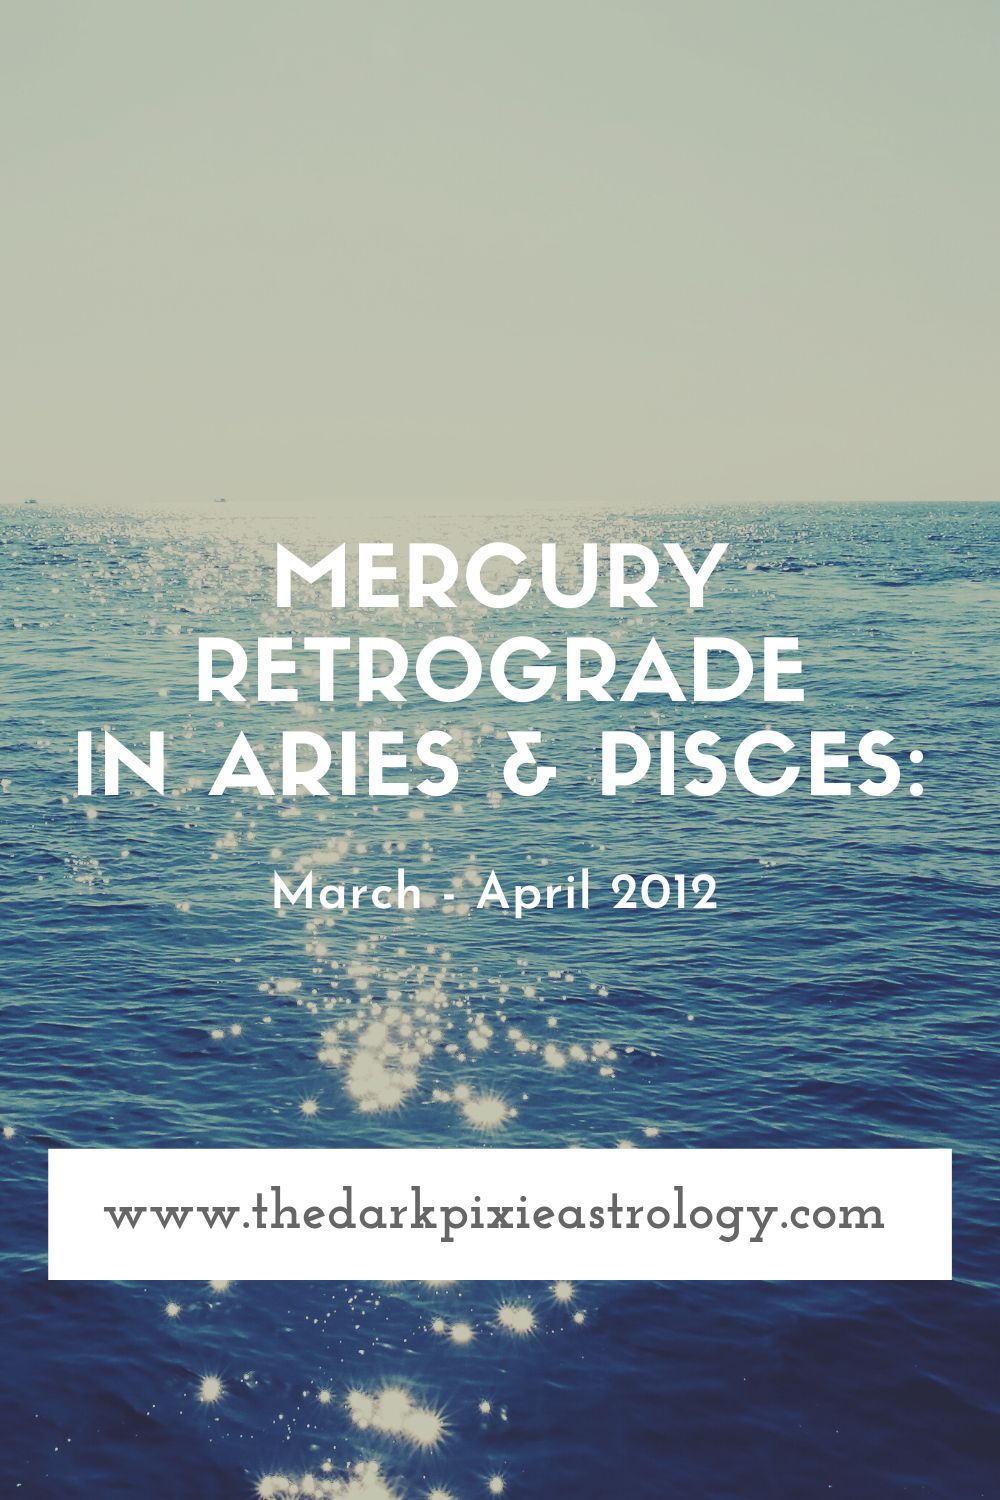 Mercury Retrograde in Aries & Pisces: March - April 2012 - The Dark Pixie Astrology